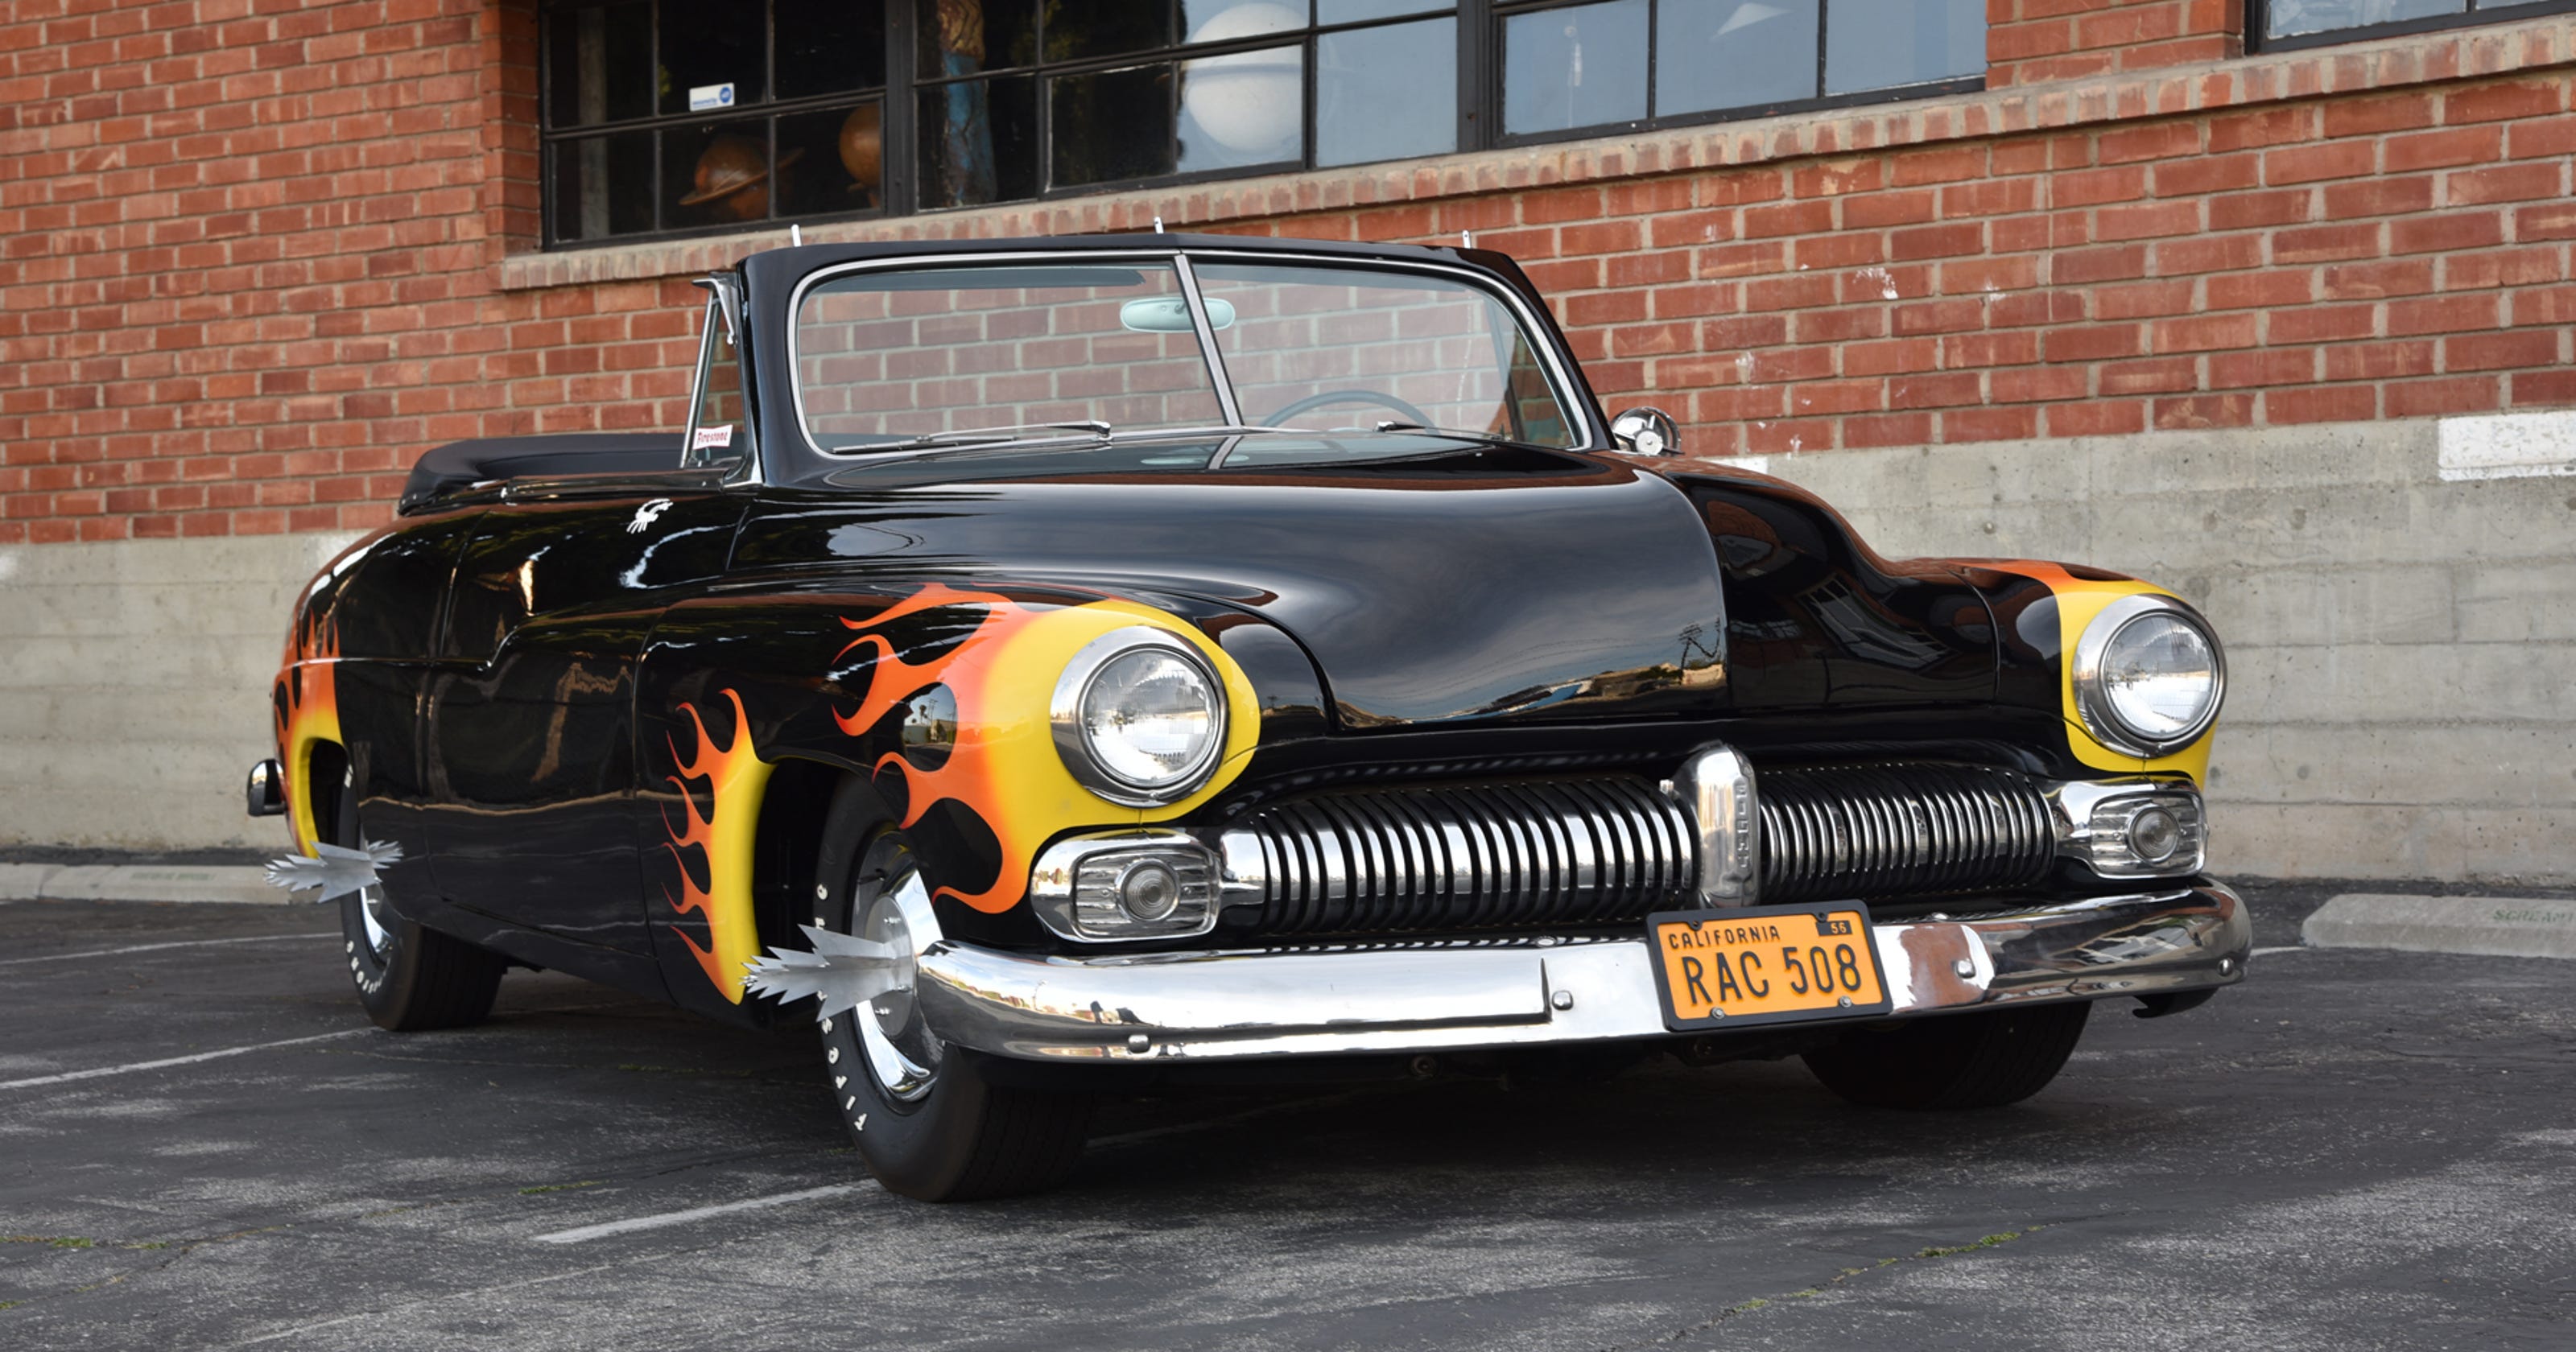 The hot rod from 'Grease' goes up for auction